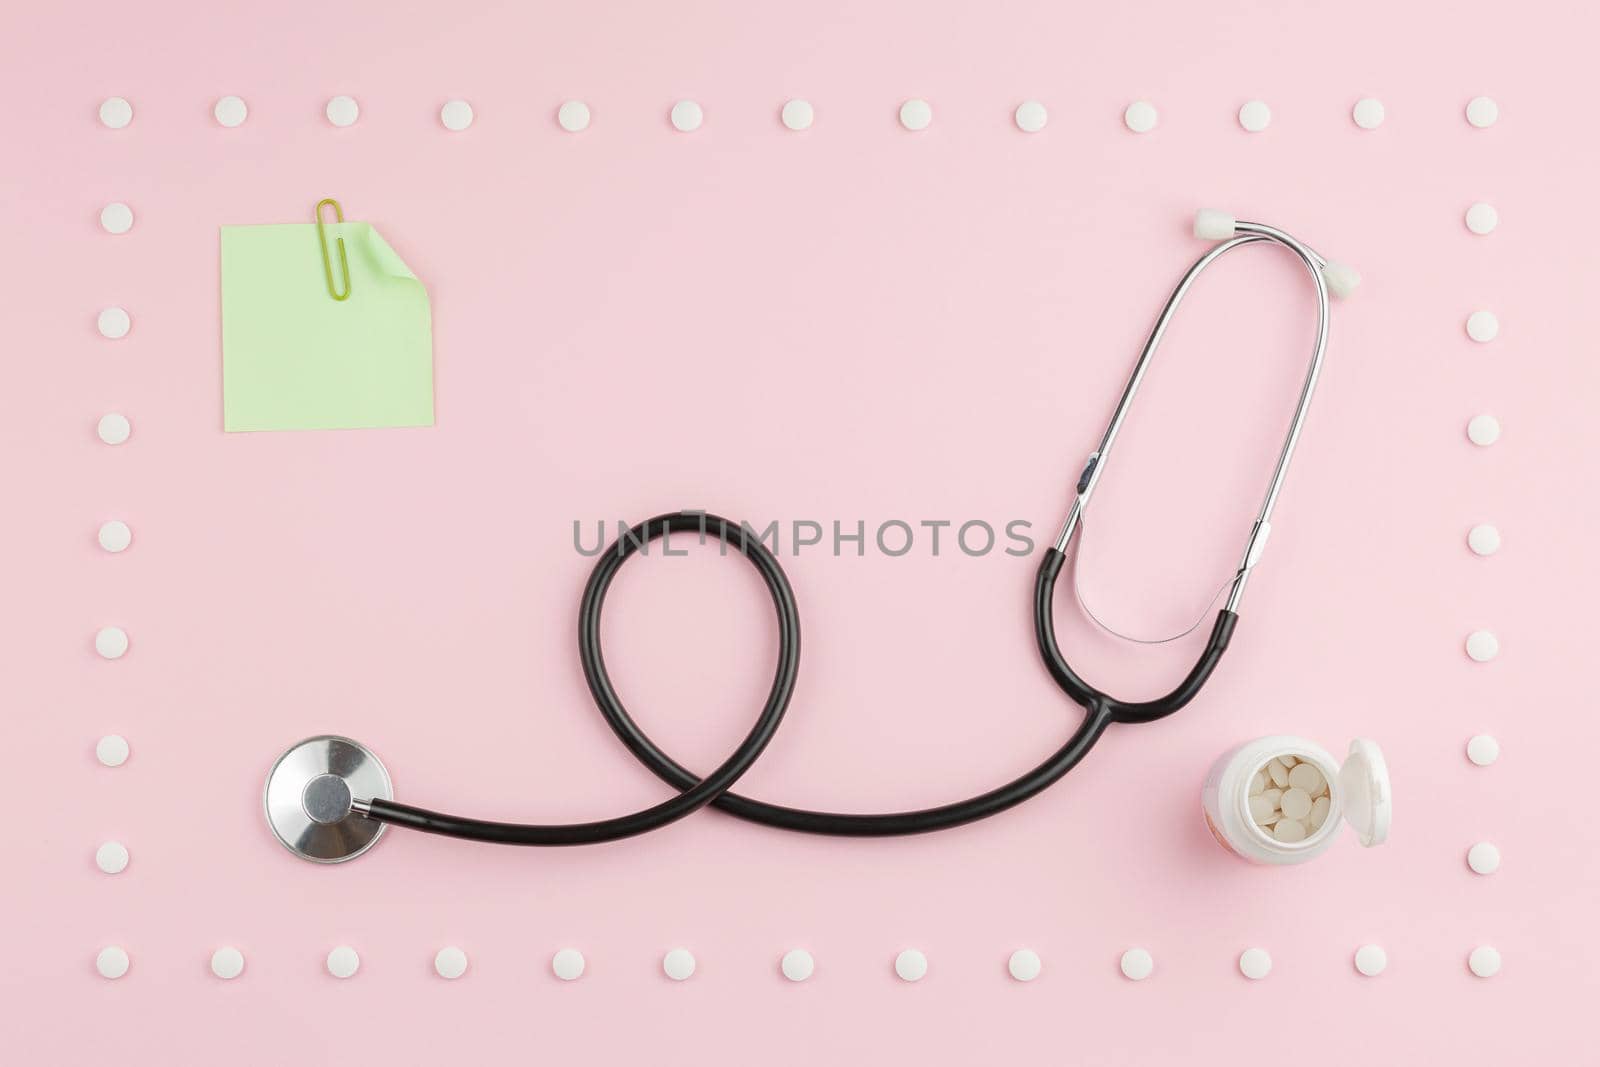 Stethoscope with a sticker in a frame of pills on a pink background. Top view.